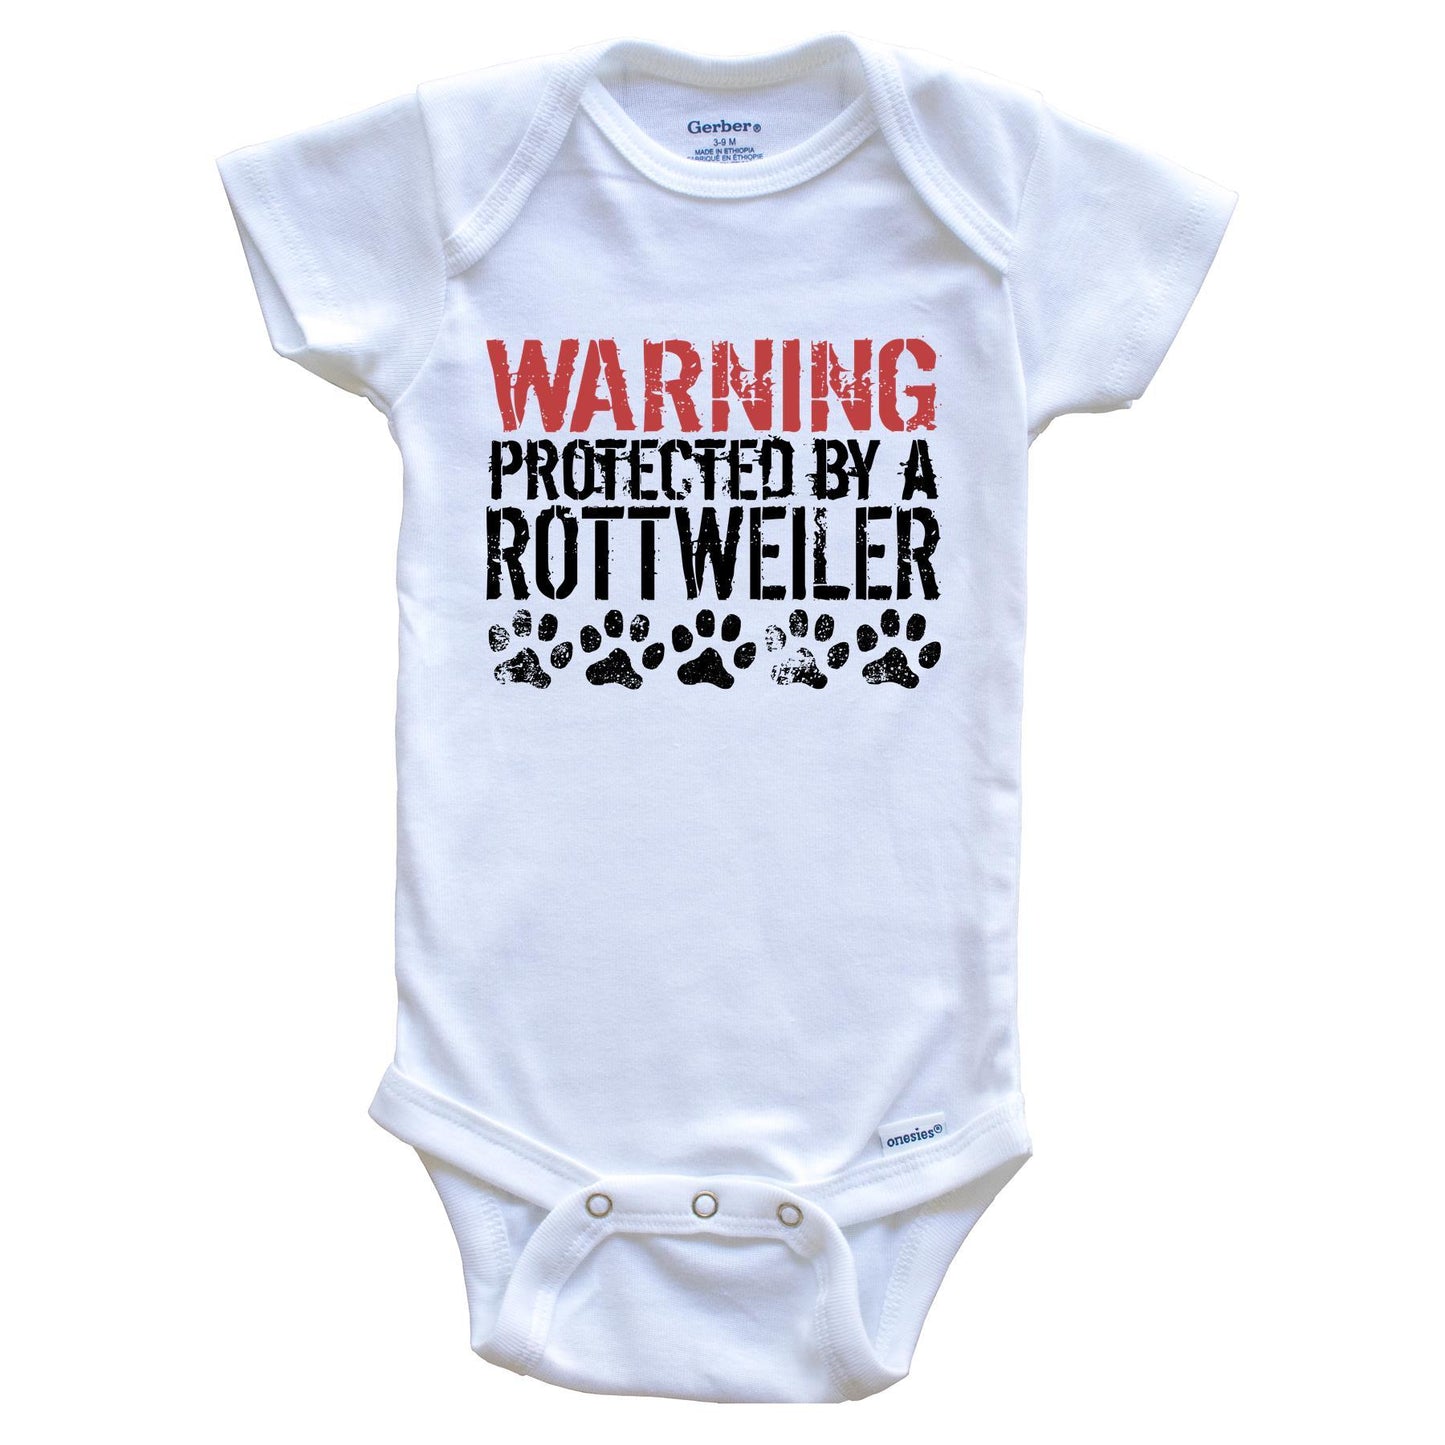 Warning Protected By A Rottweiler Baby Onesie